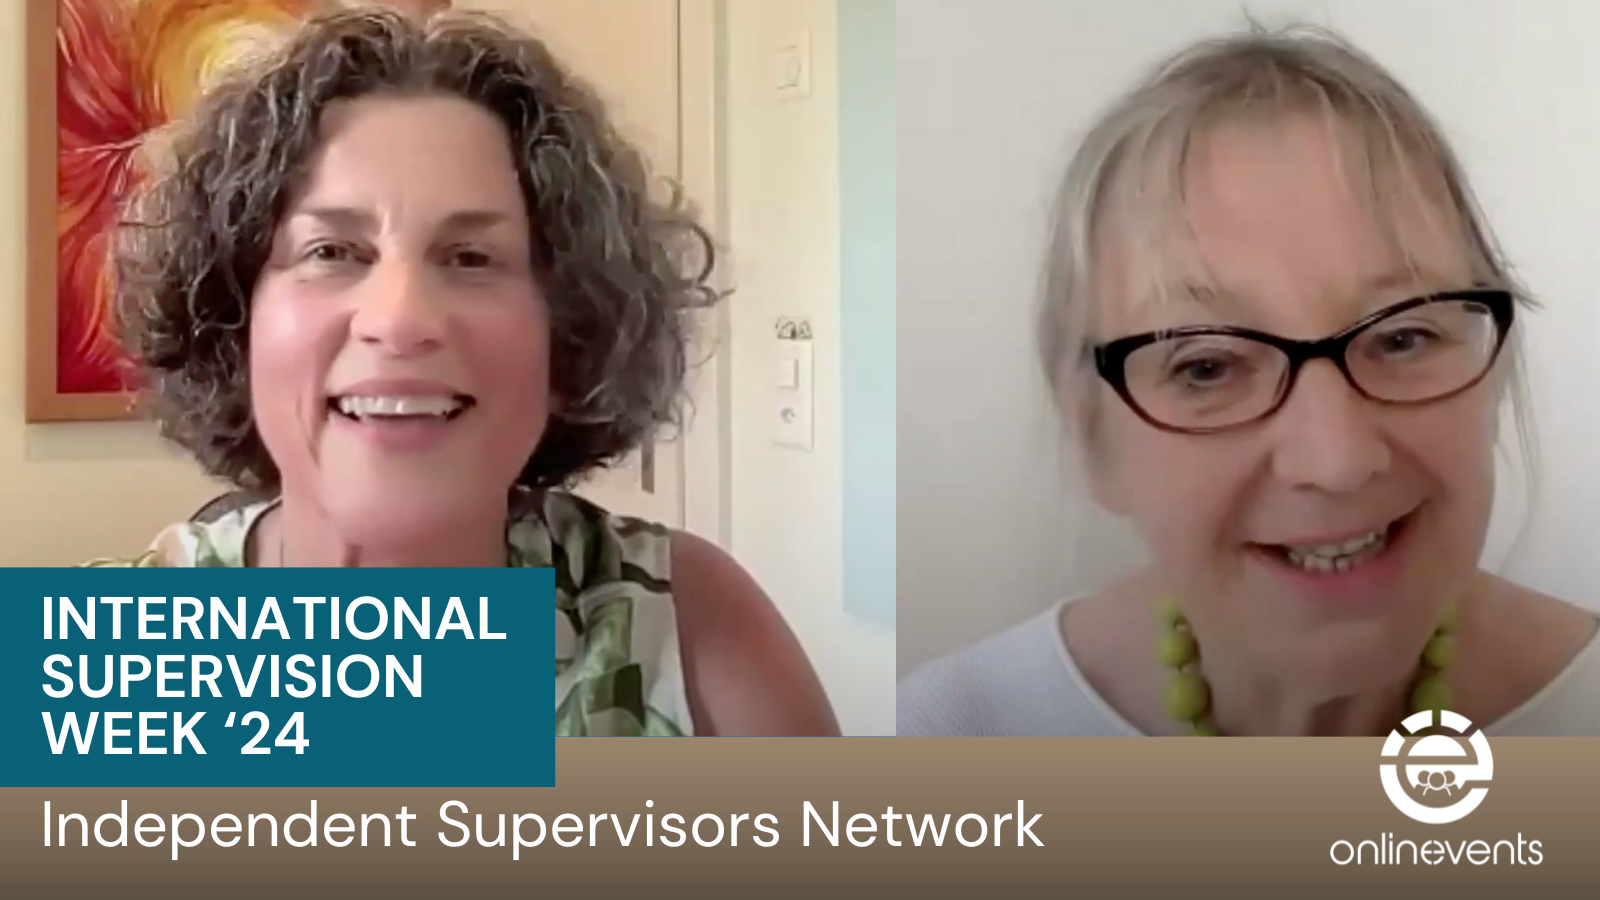 The Seven-Eyed Model of Supervision According to Winnie the Pooh Part 1 Workshop with Gillian Walter and Shirley Smith (1)